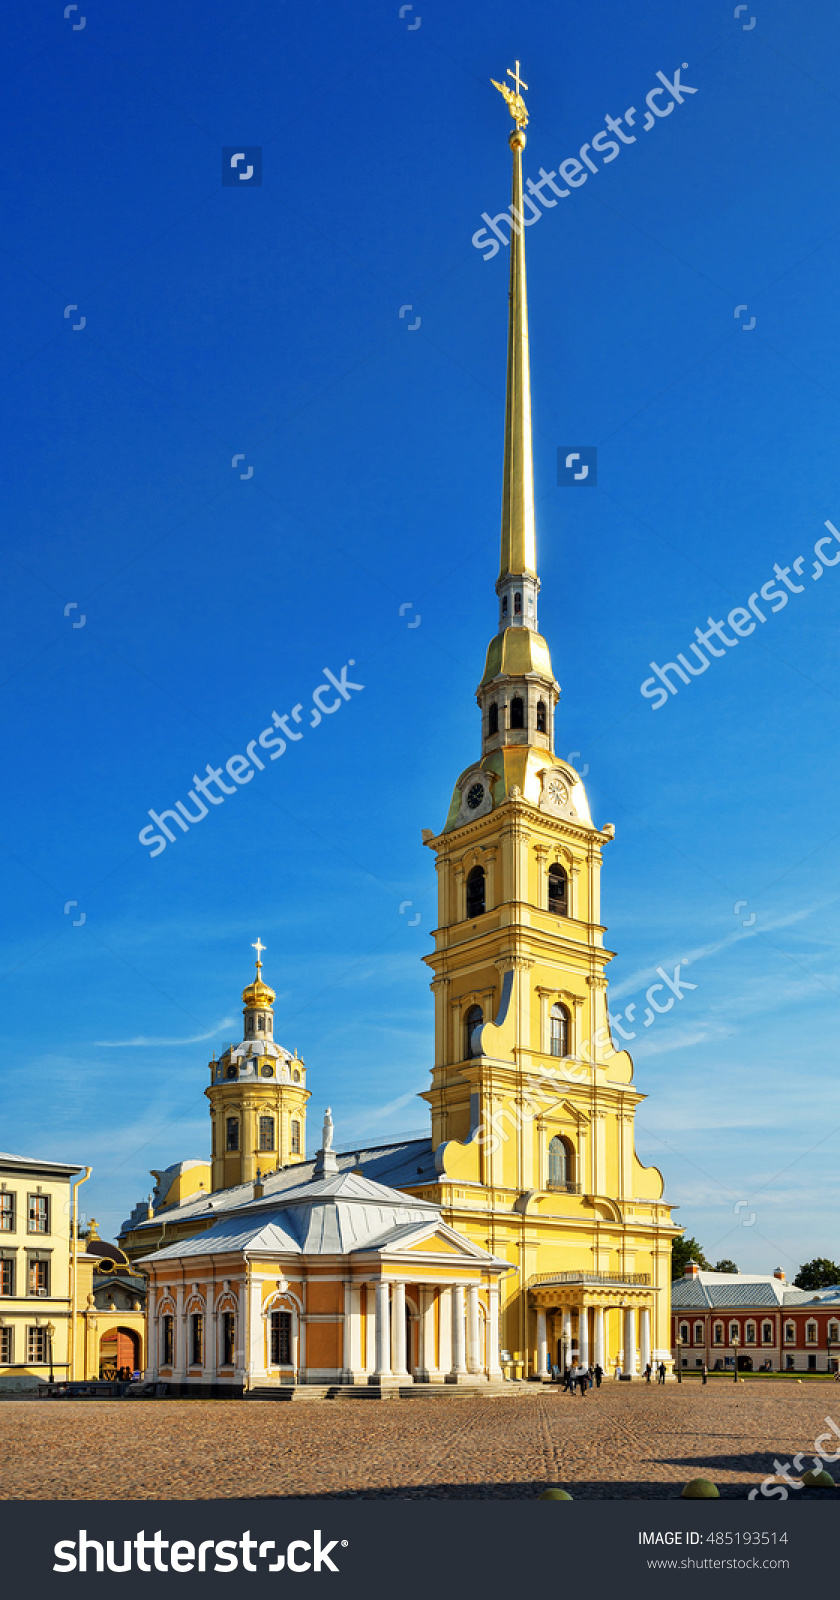 Peter Paul Cathedral Peter Paul Fortress Stock Photo 485193514.